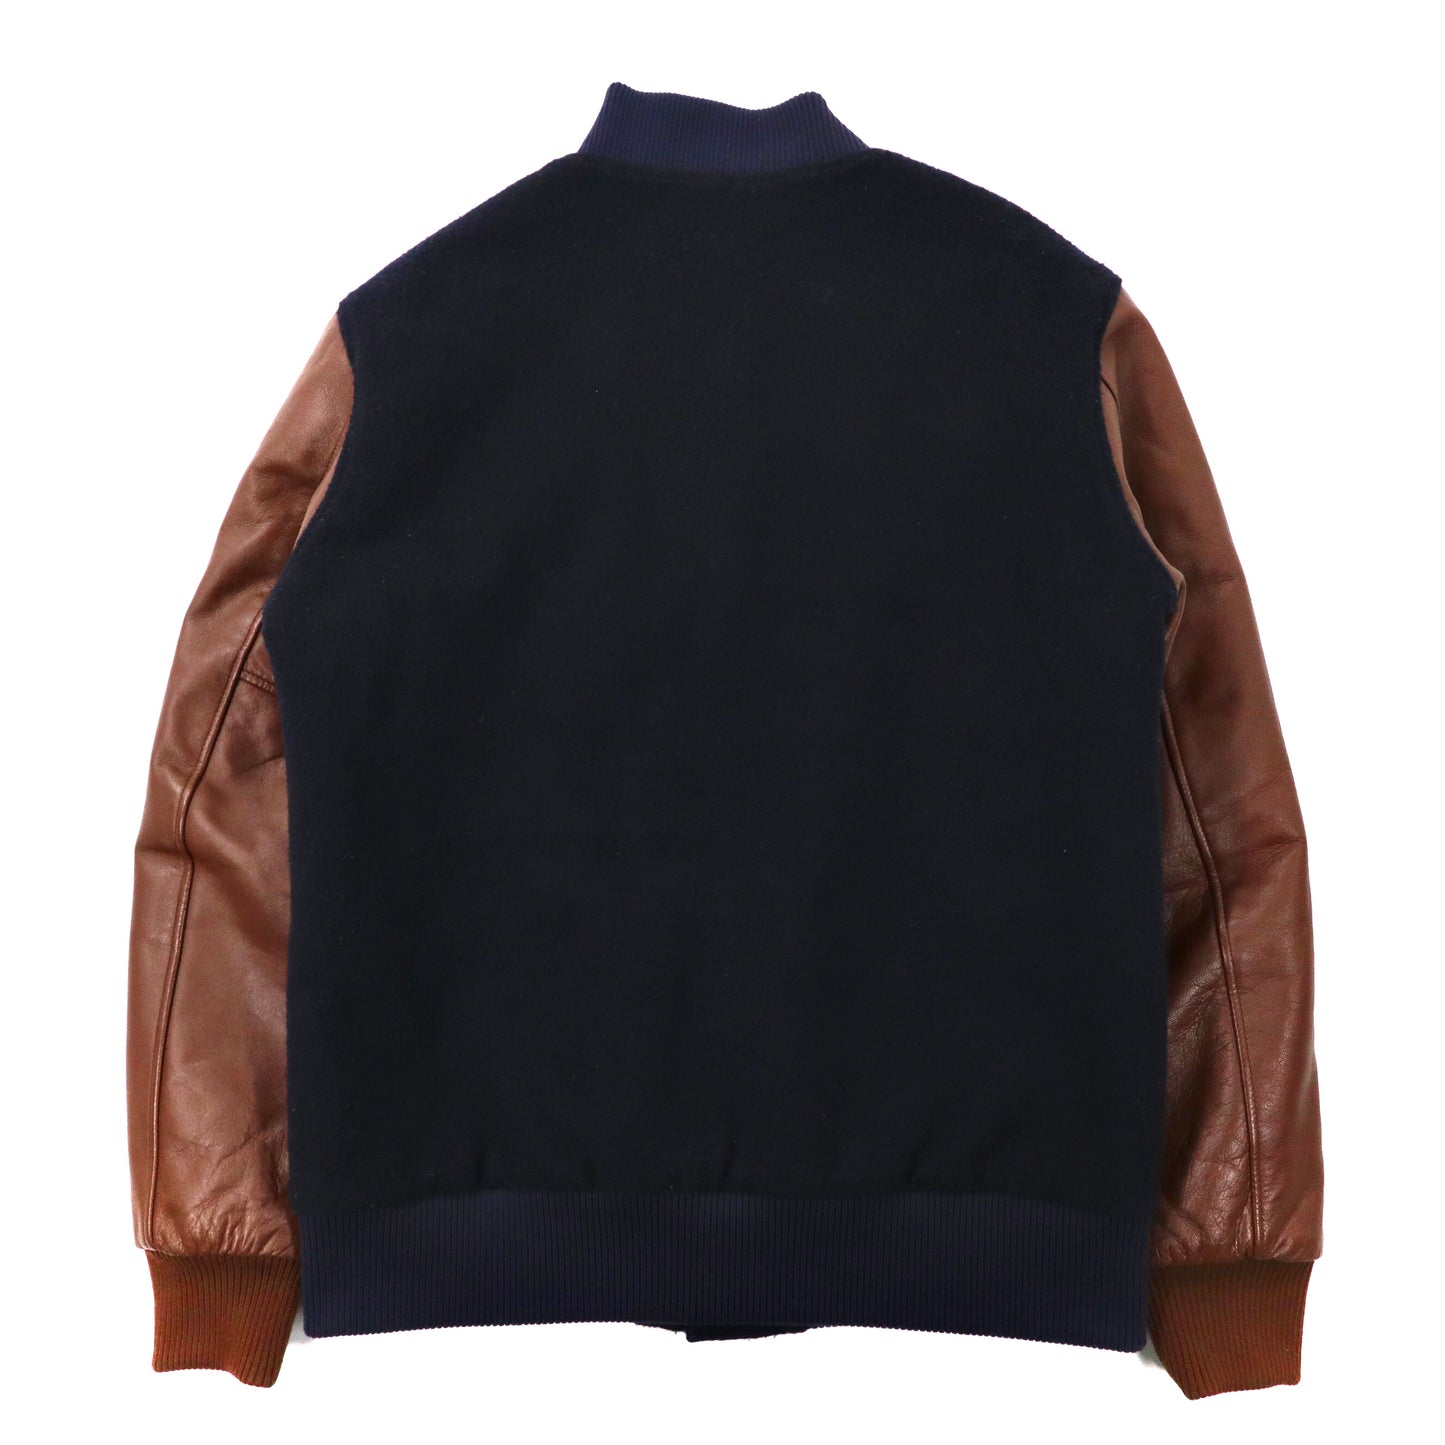 Mr. GENTLEMAN Leather Sleeve VARSITY JACKET L Navy Brown Wool Lamb Leather  MG13A-CO06 Japan MADE